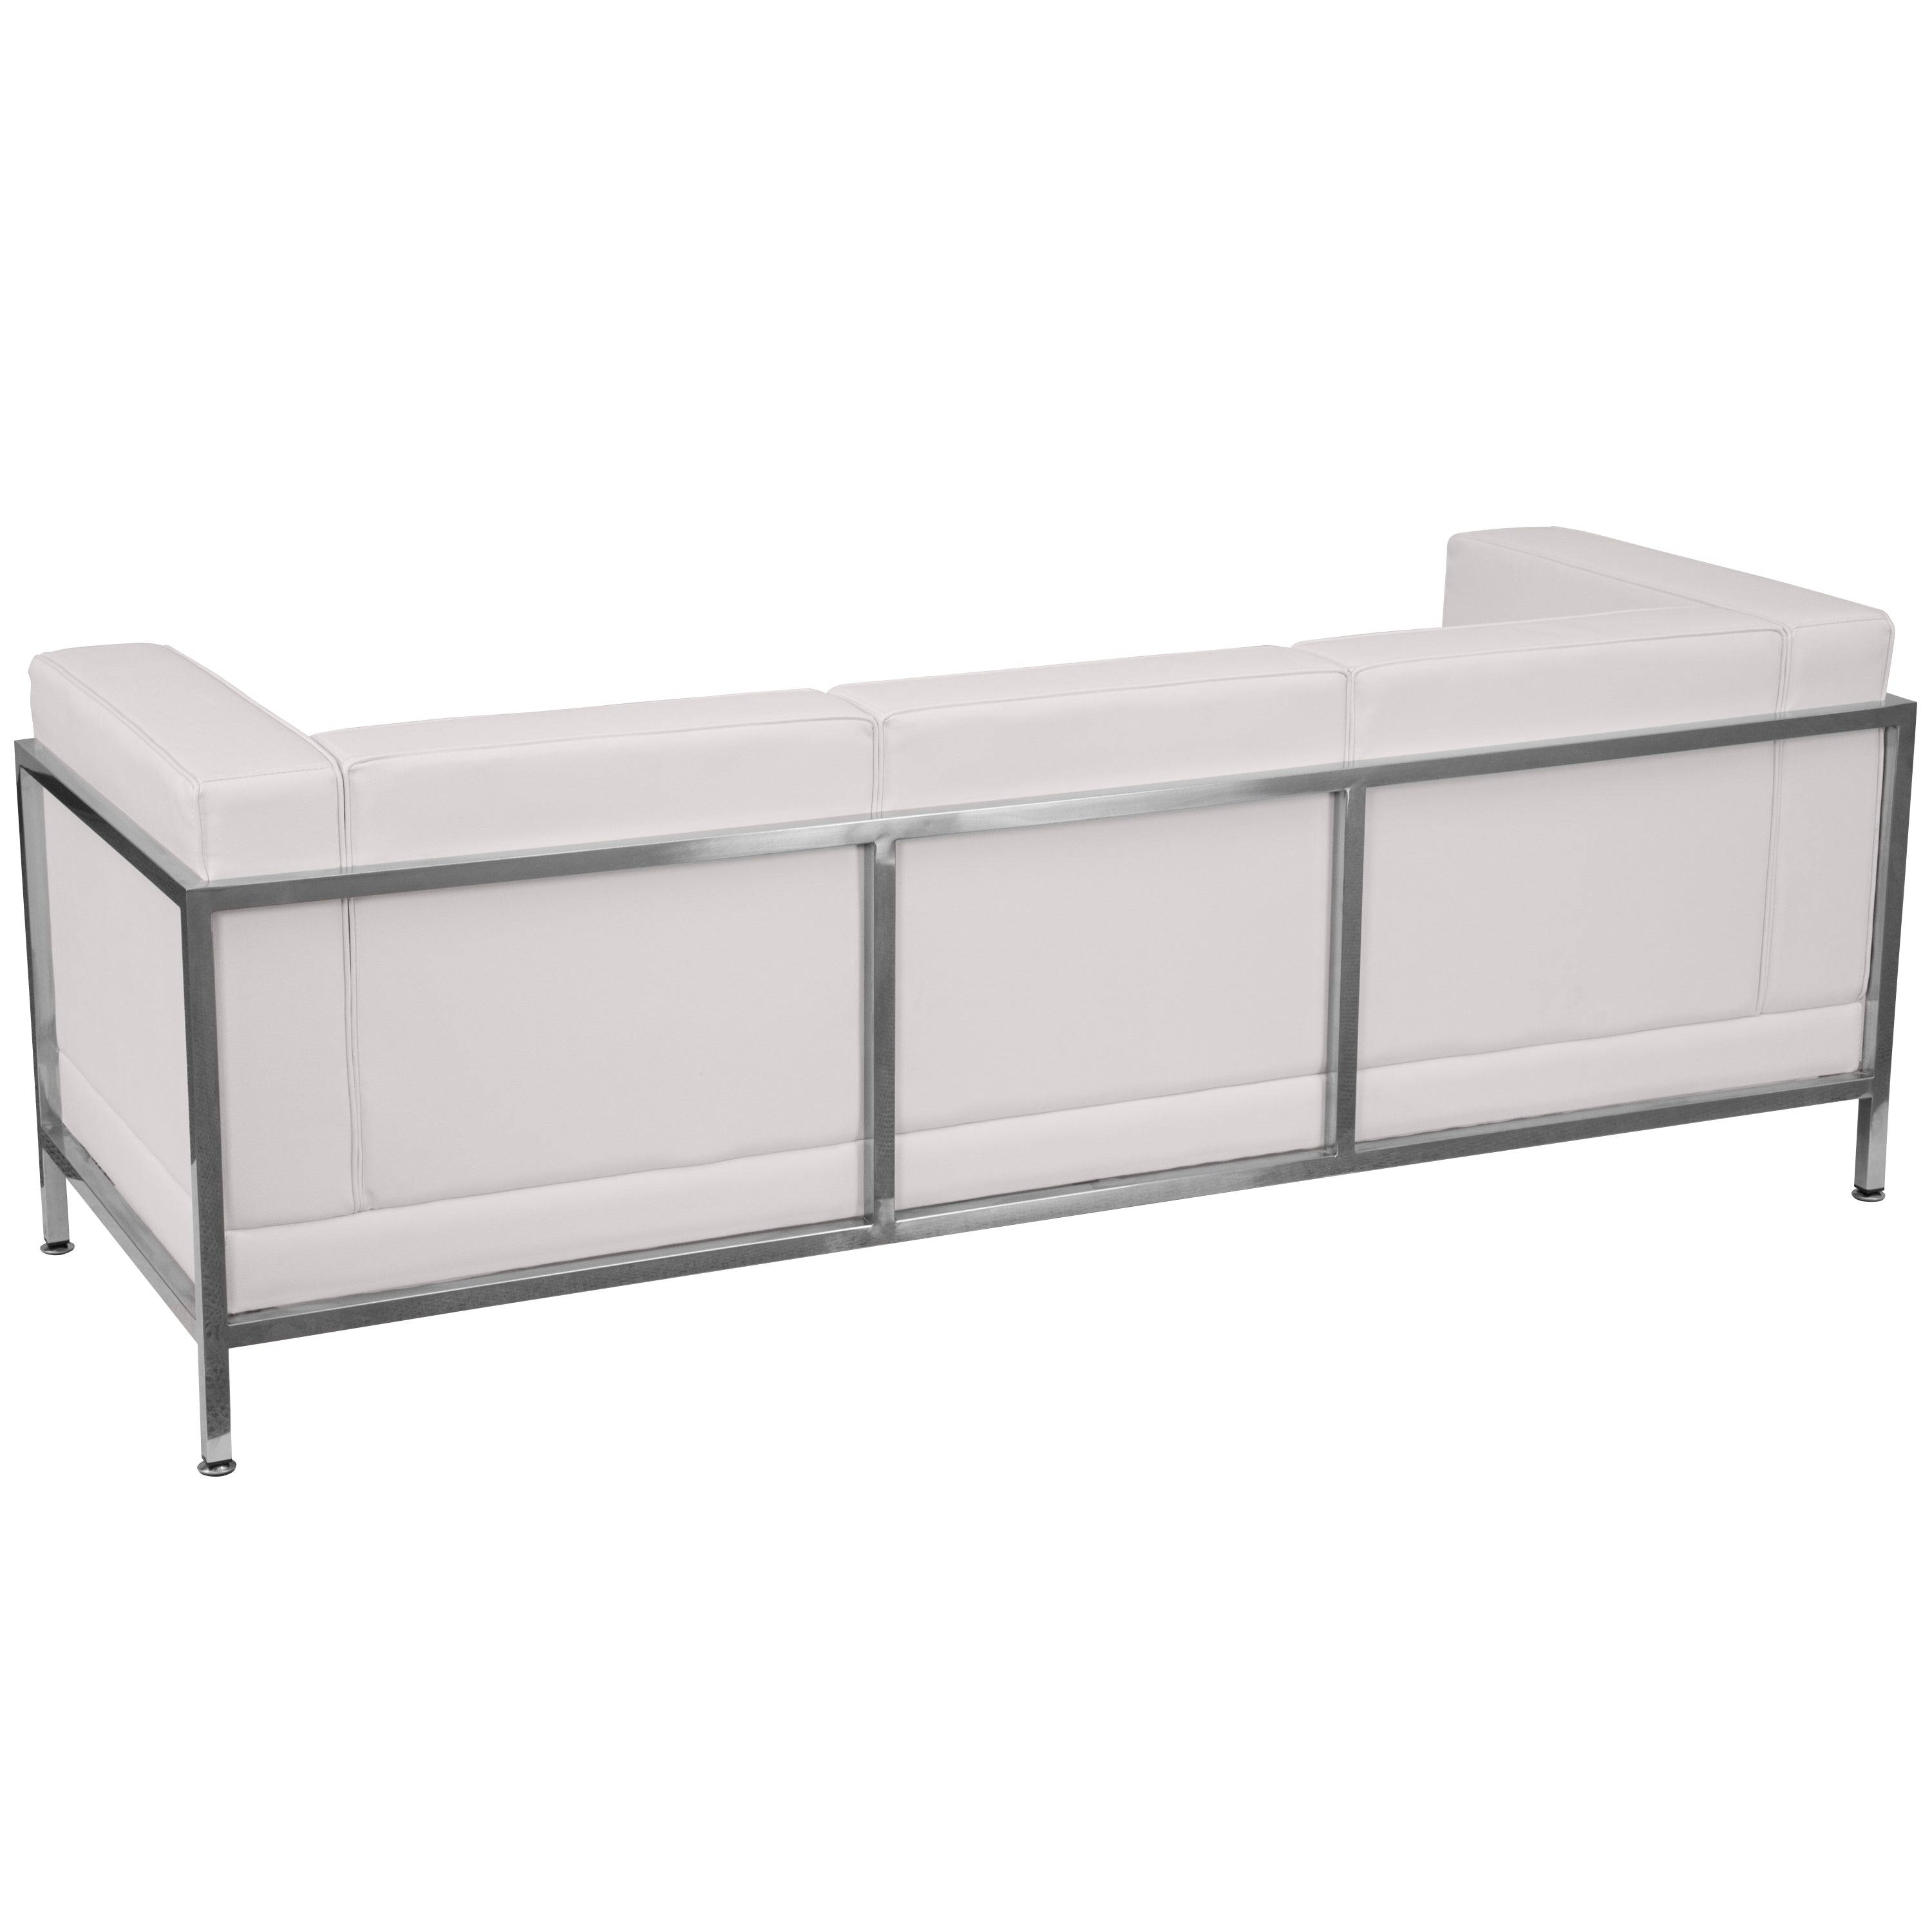 HERCULES Imagination Series Contemporary LeatherSoft Modular Sofa with Quilted Tufted Seat and Encasing Frame-Modular Reception Sofa-Flash Furniture-Wall2Wall Furnishings